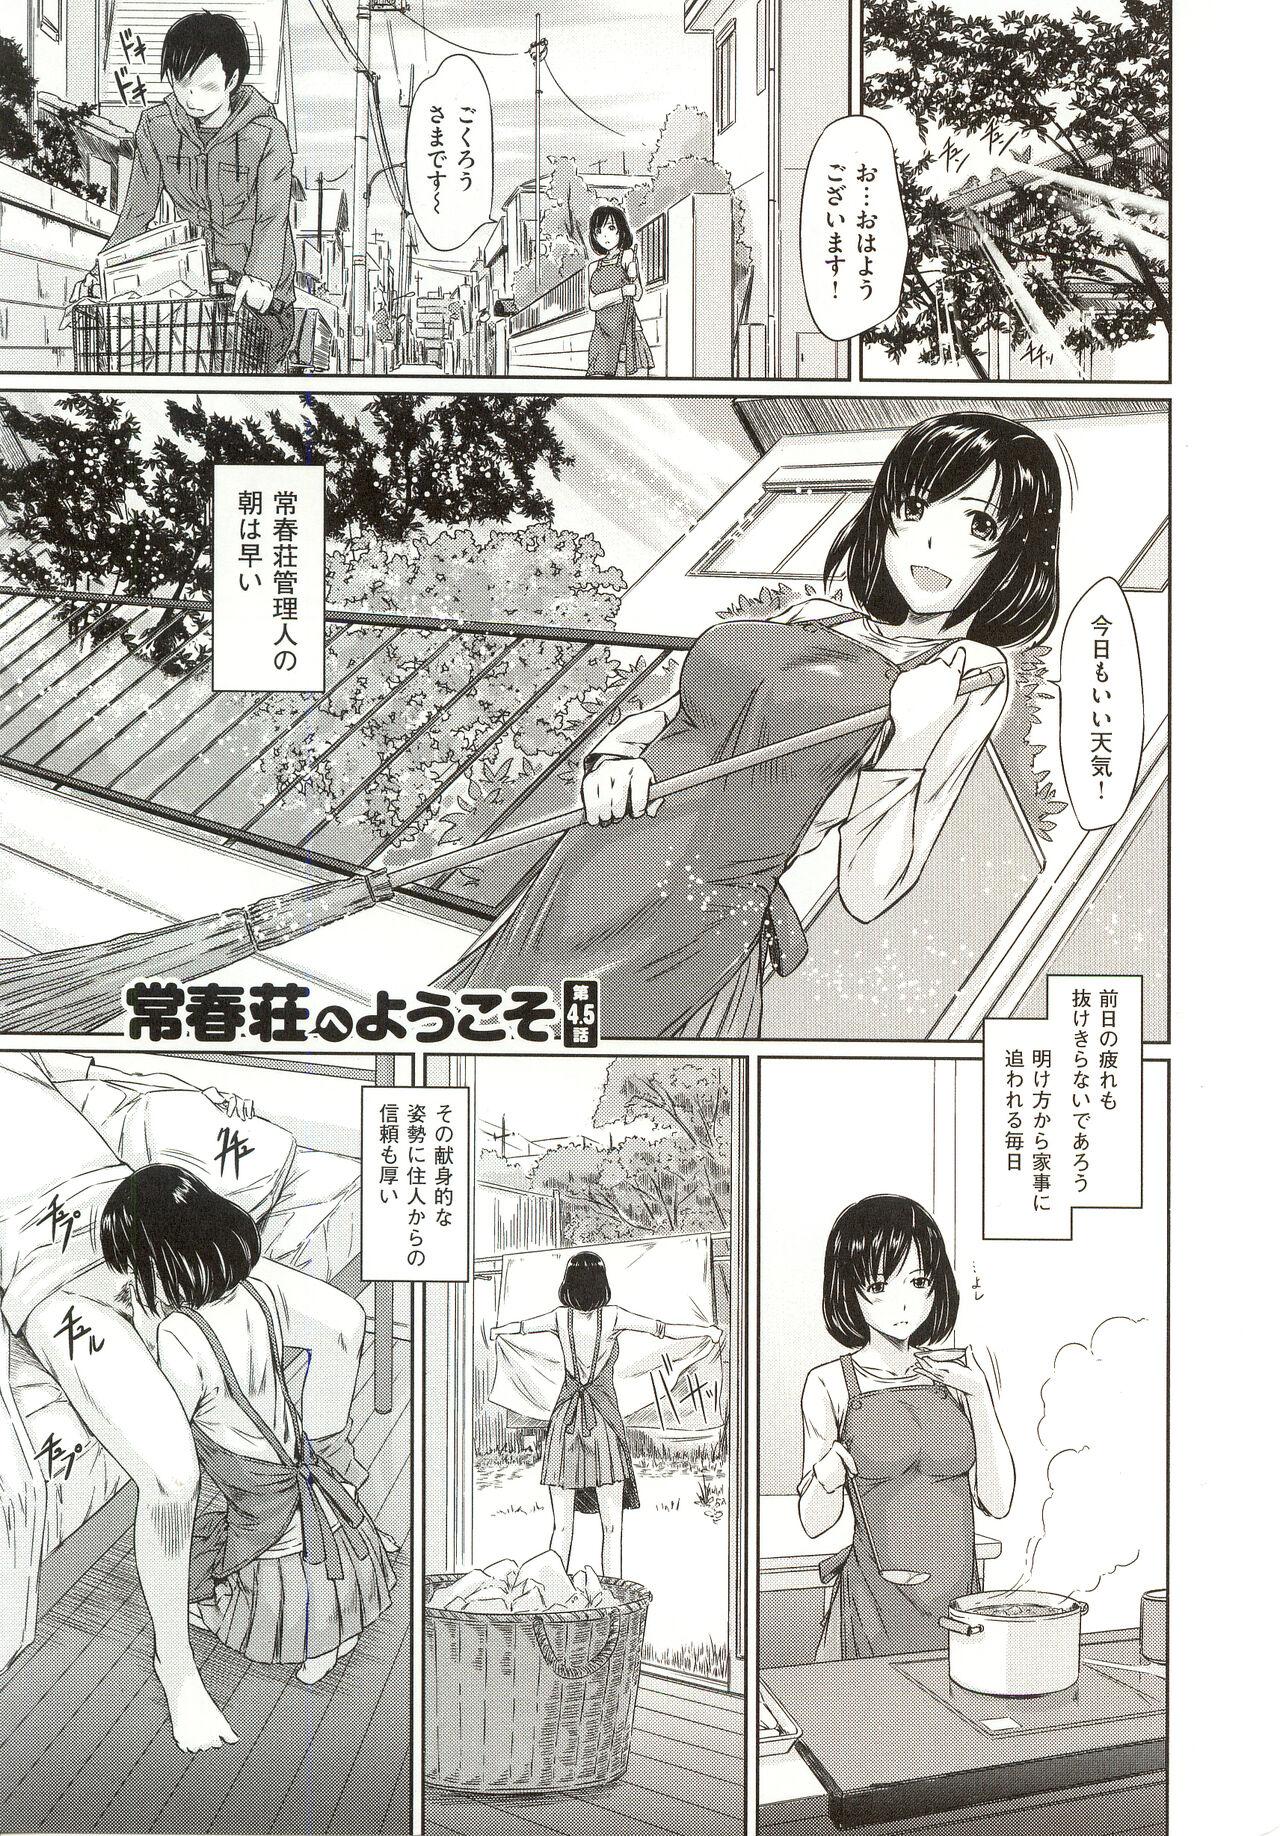 Tokoharusou e Youkoso - Welcome to the apartment of everlasting spring... come to me. 105